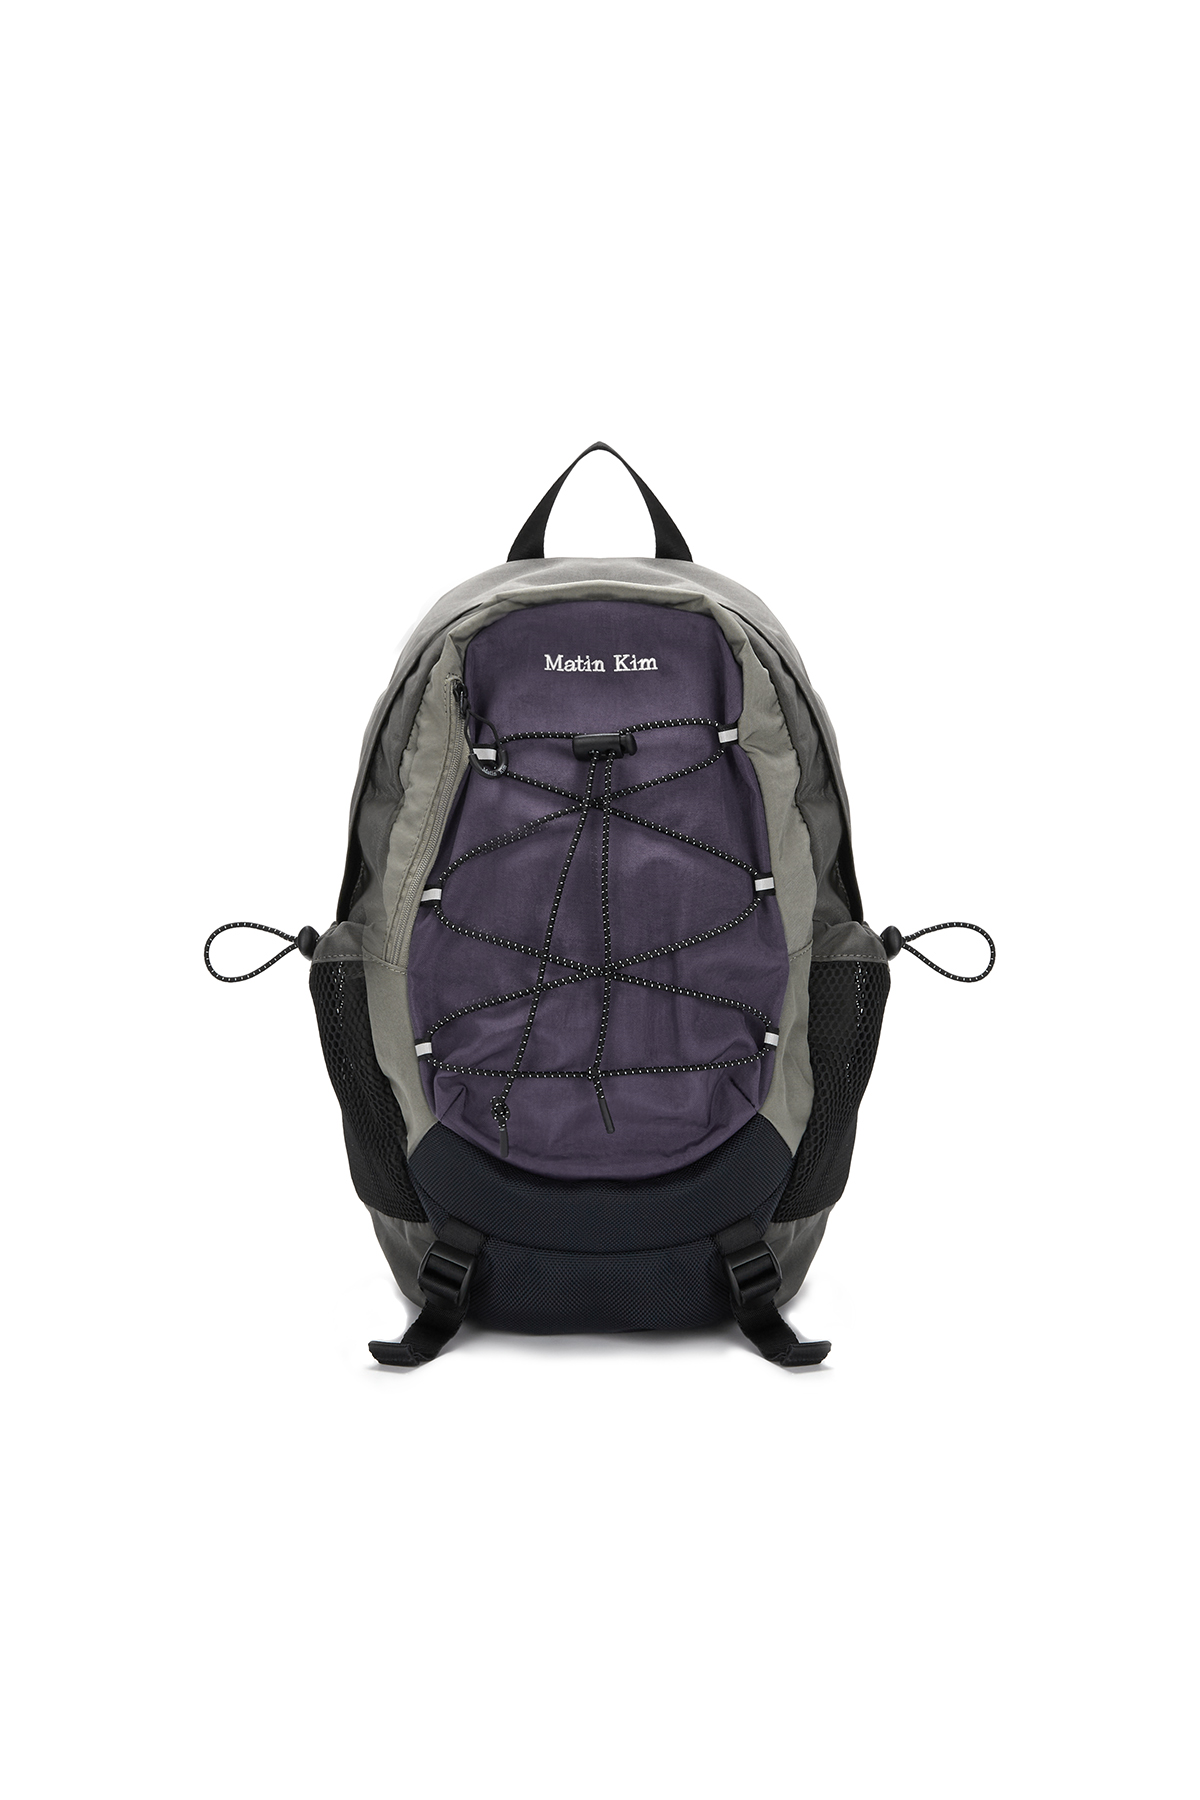 STRING UTILITY BACK PACK IN PURPLE